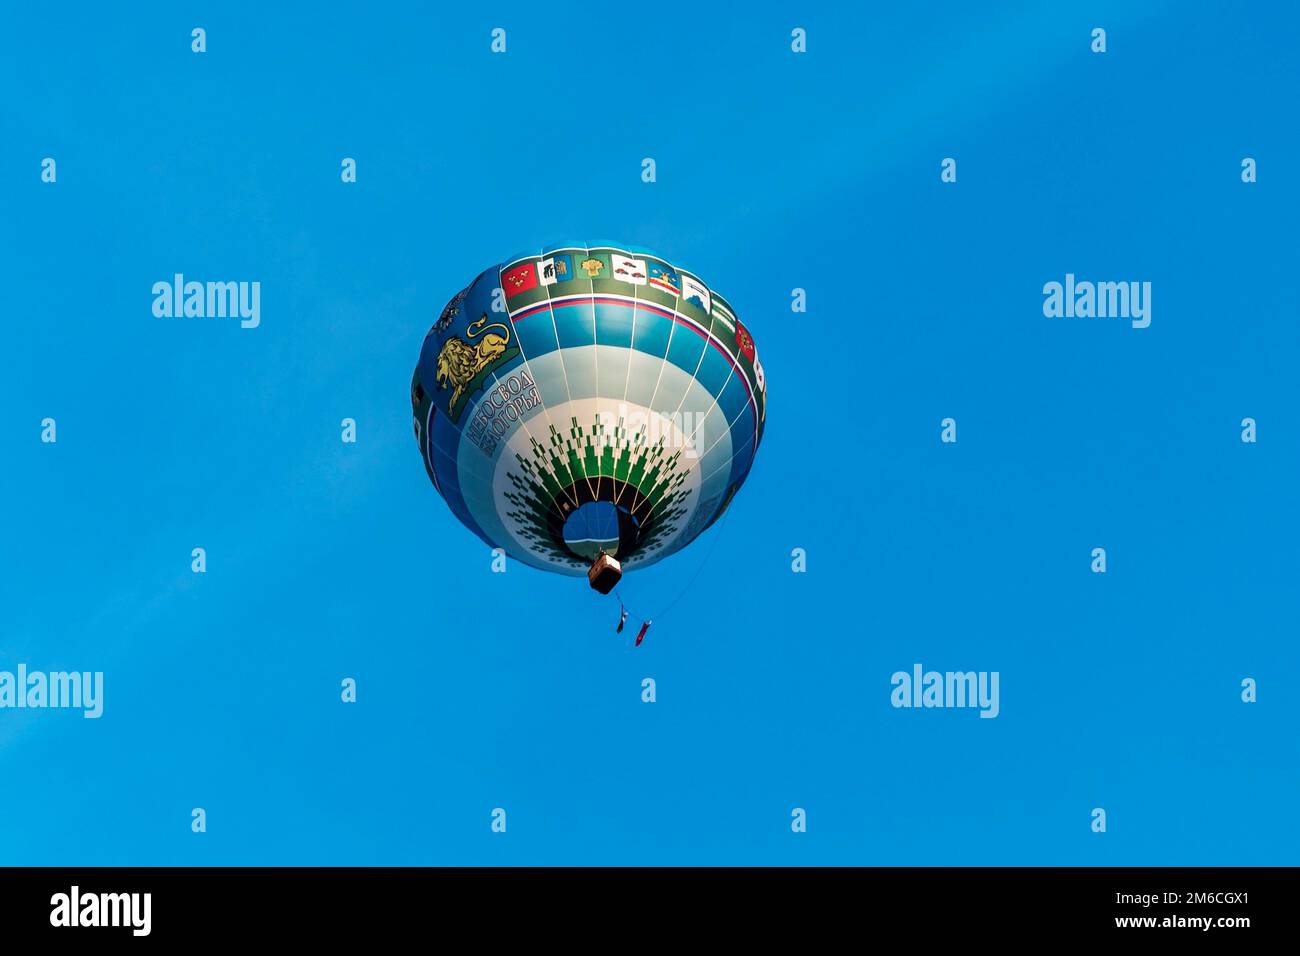 Balloon with inscription Sky mountains in the background of blue sky Stock Photo